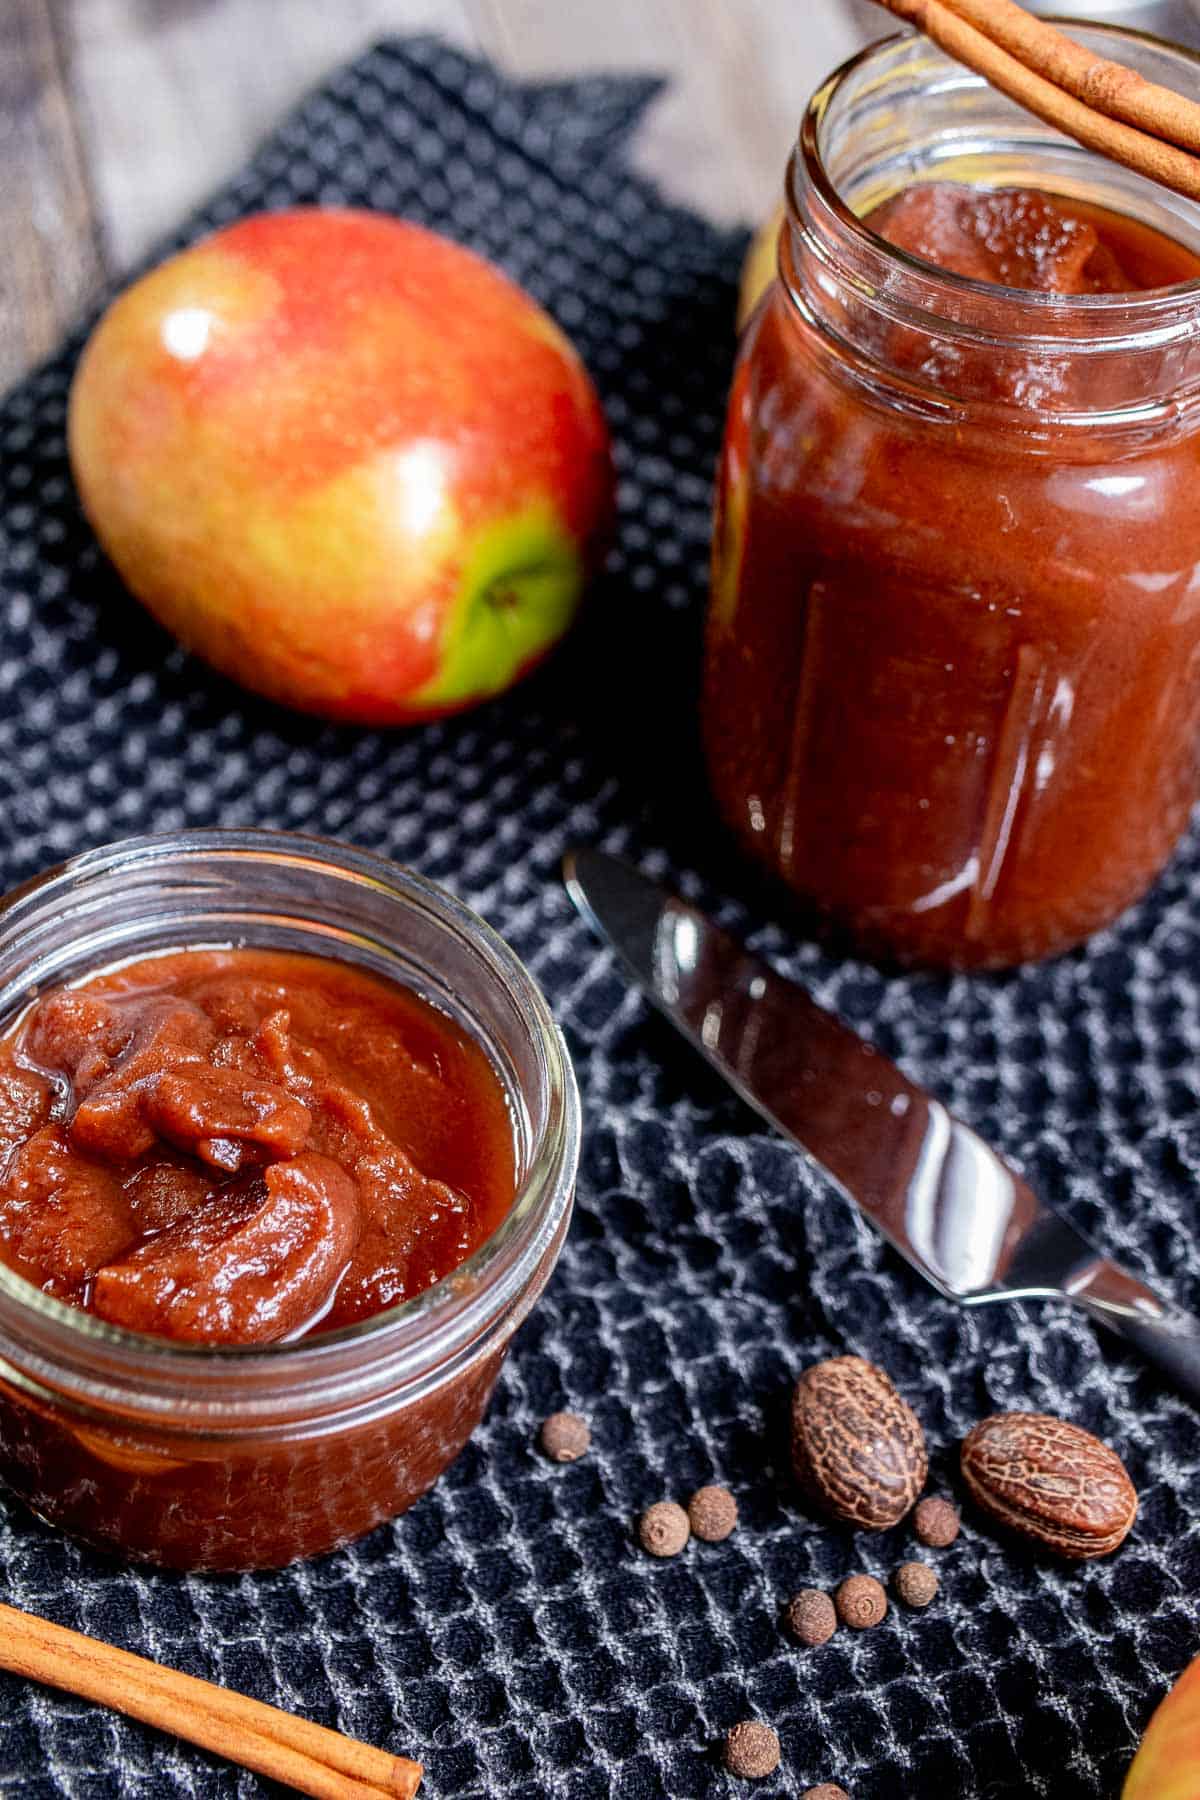 Angled view of jars of apple butter on a black cloth surrounded by apples, cinnamon sticks, and whole nutmegs.